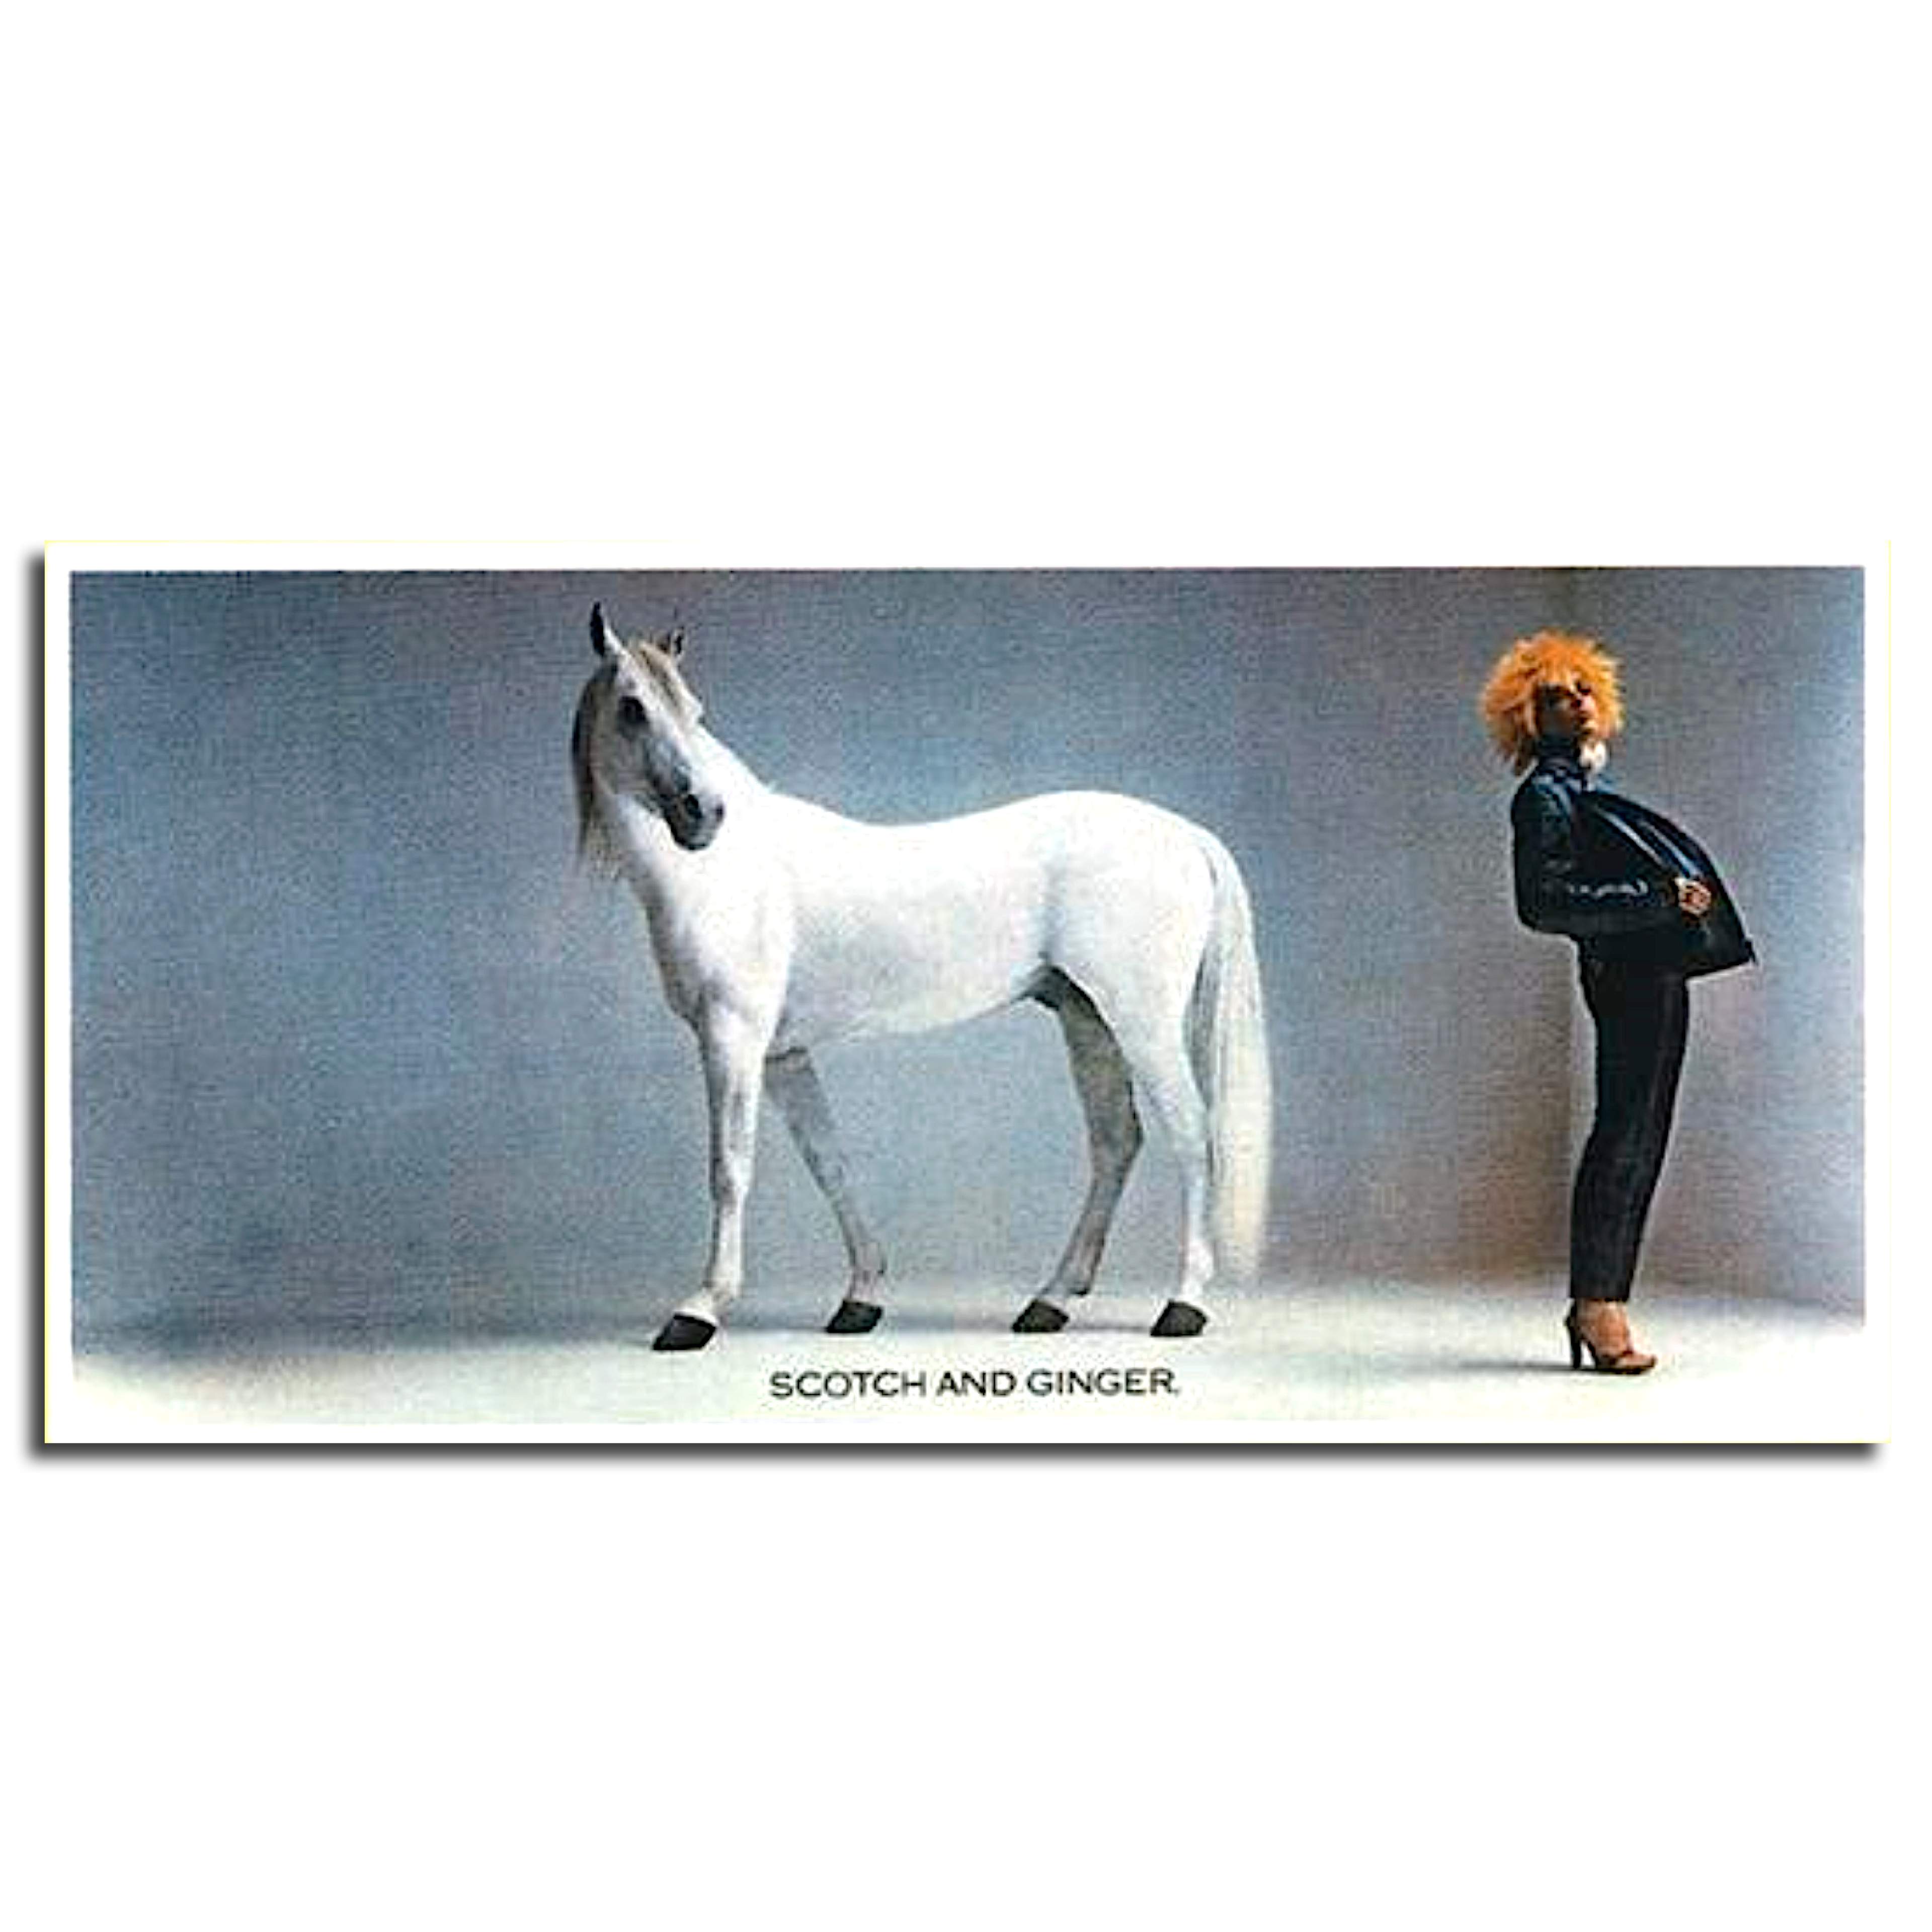 Colour photograph of a white horse with a ginger-haired woman dressed in black leather outfit. Award-winning poster for White Horse Whisky.